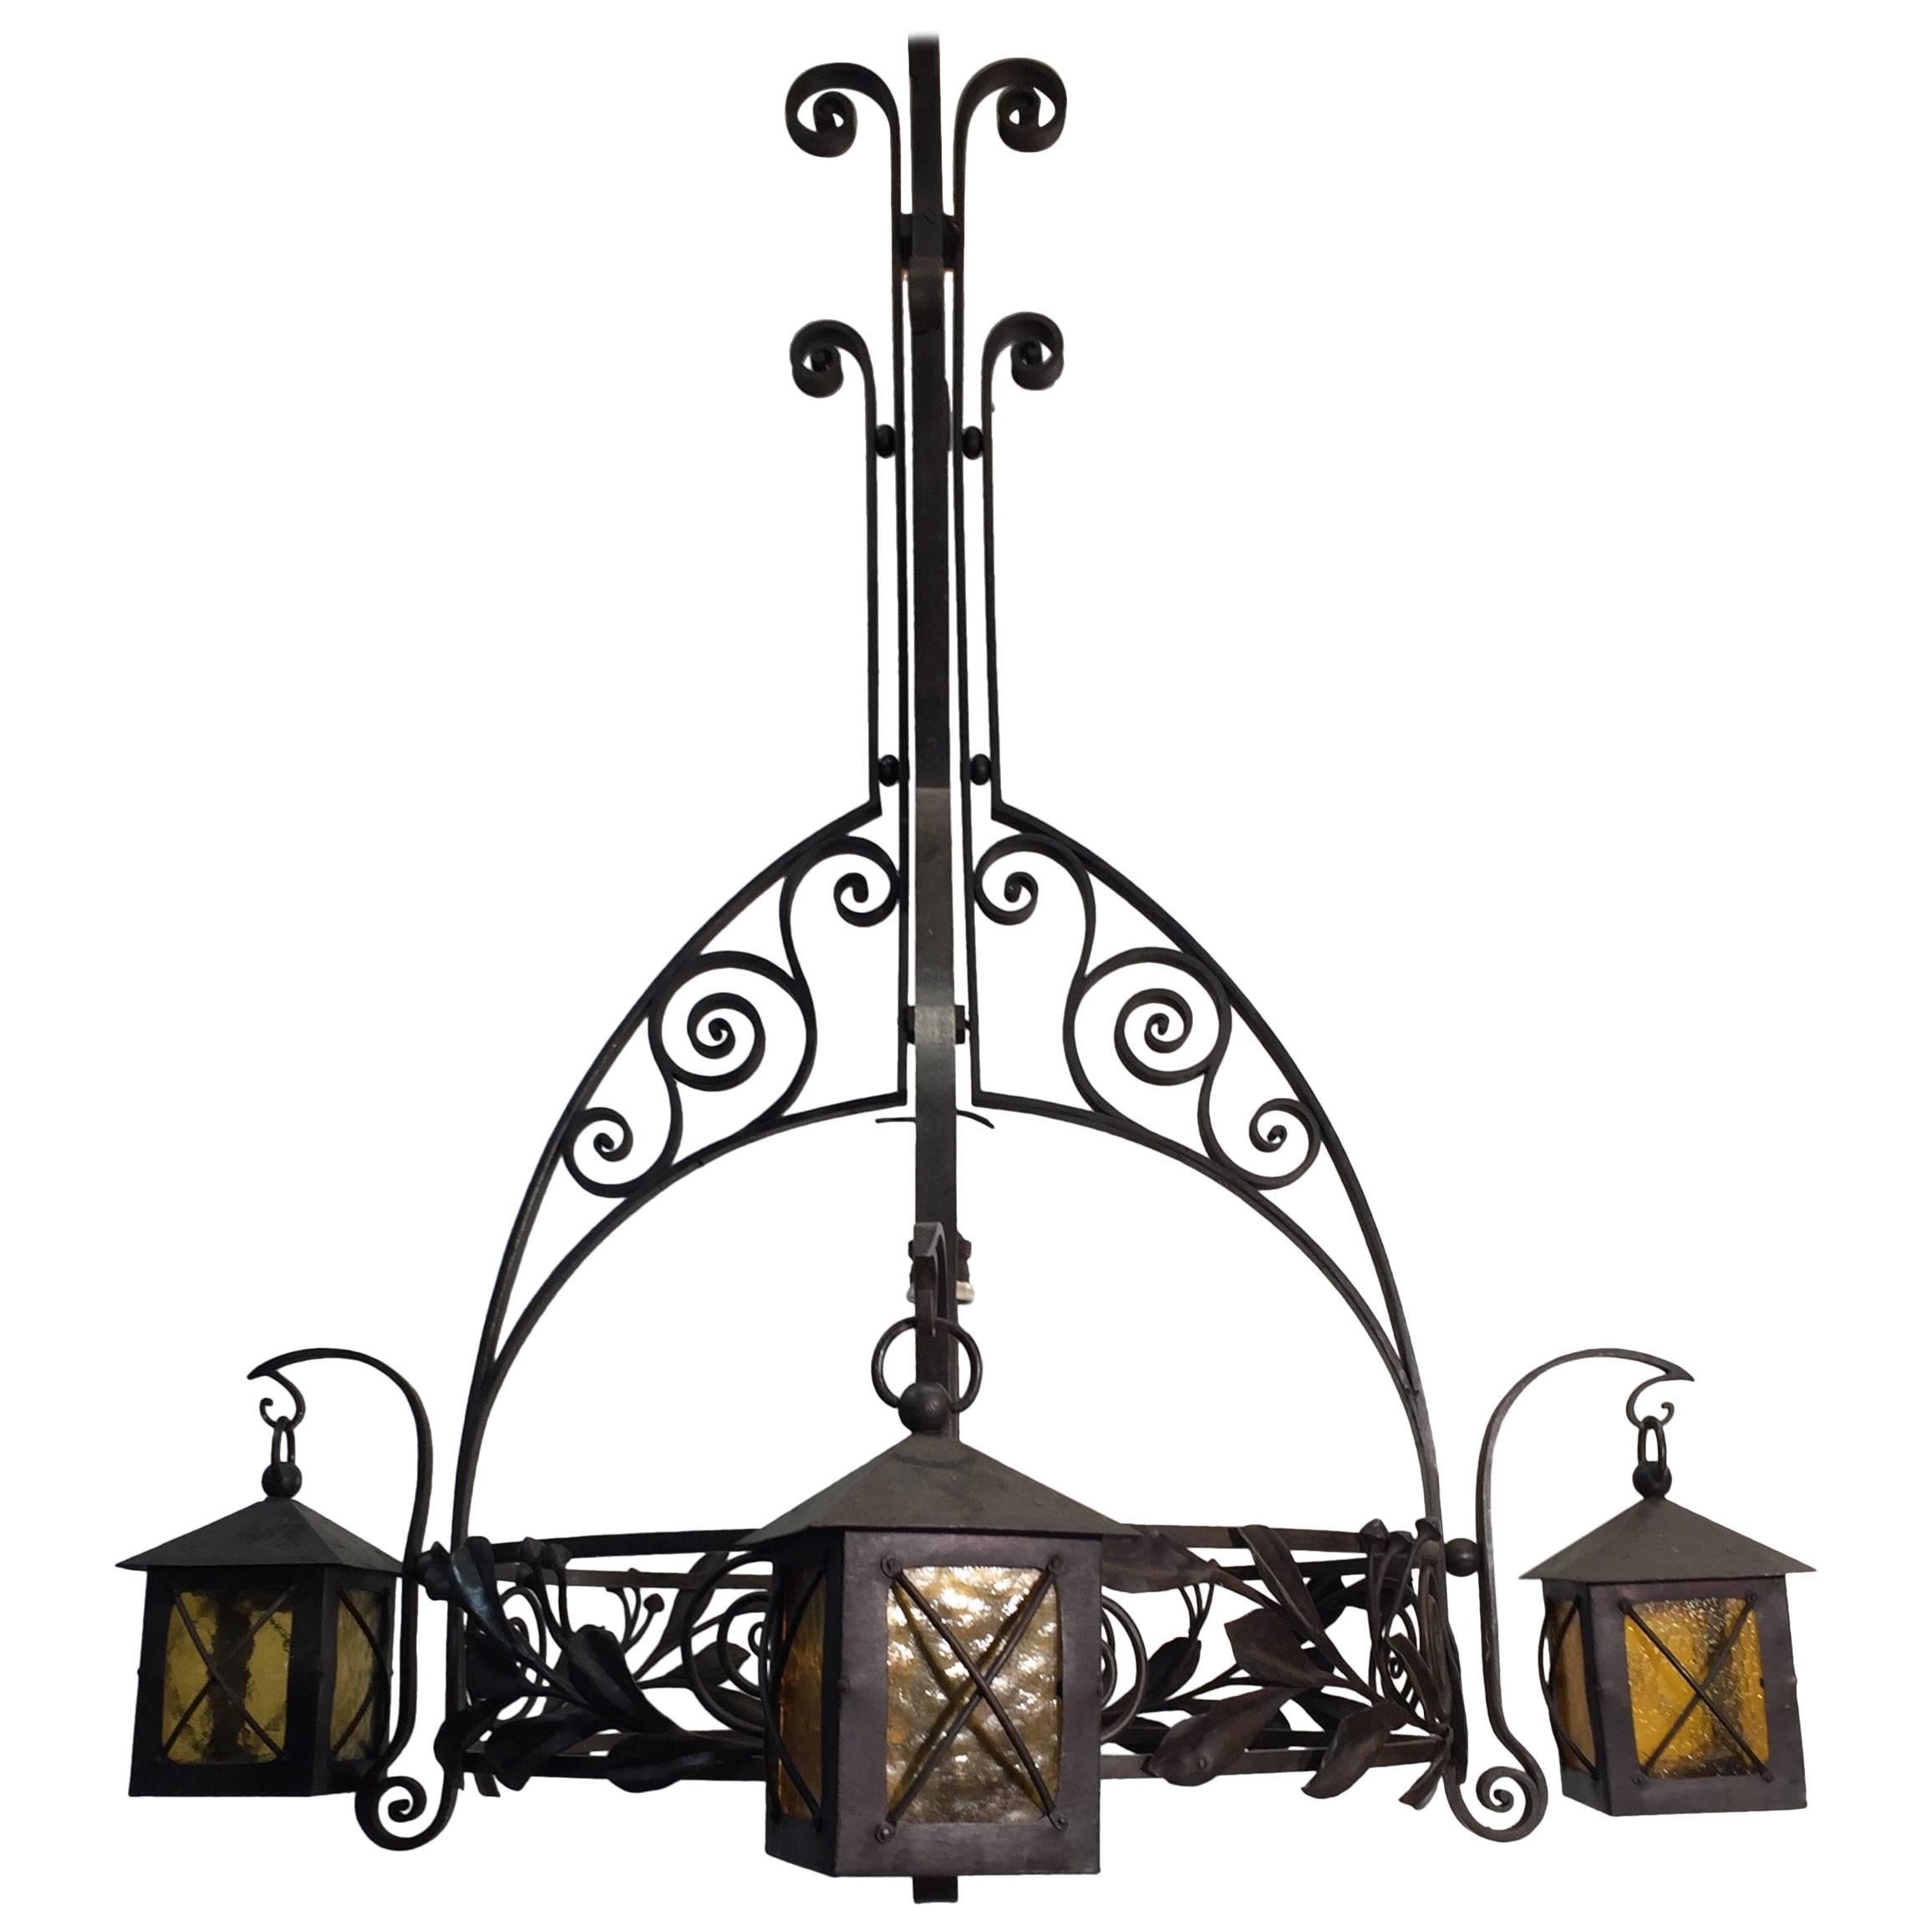 Stunning Early Arts and Crafts Wrought Iron Chandelier by Francois Carion